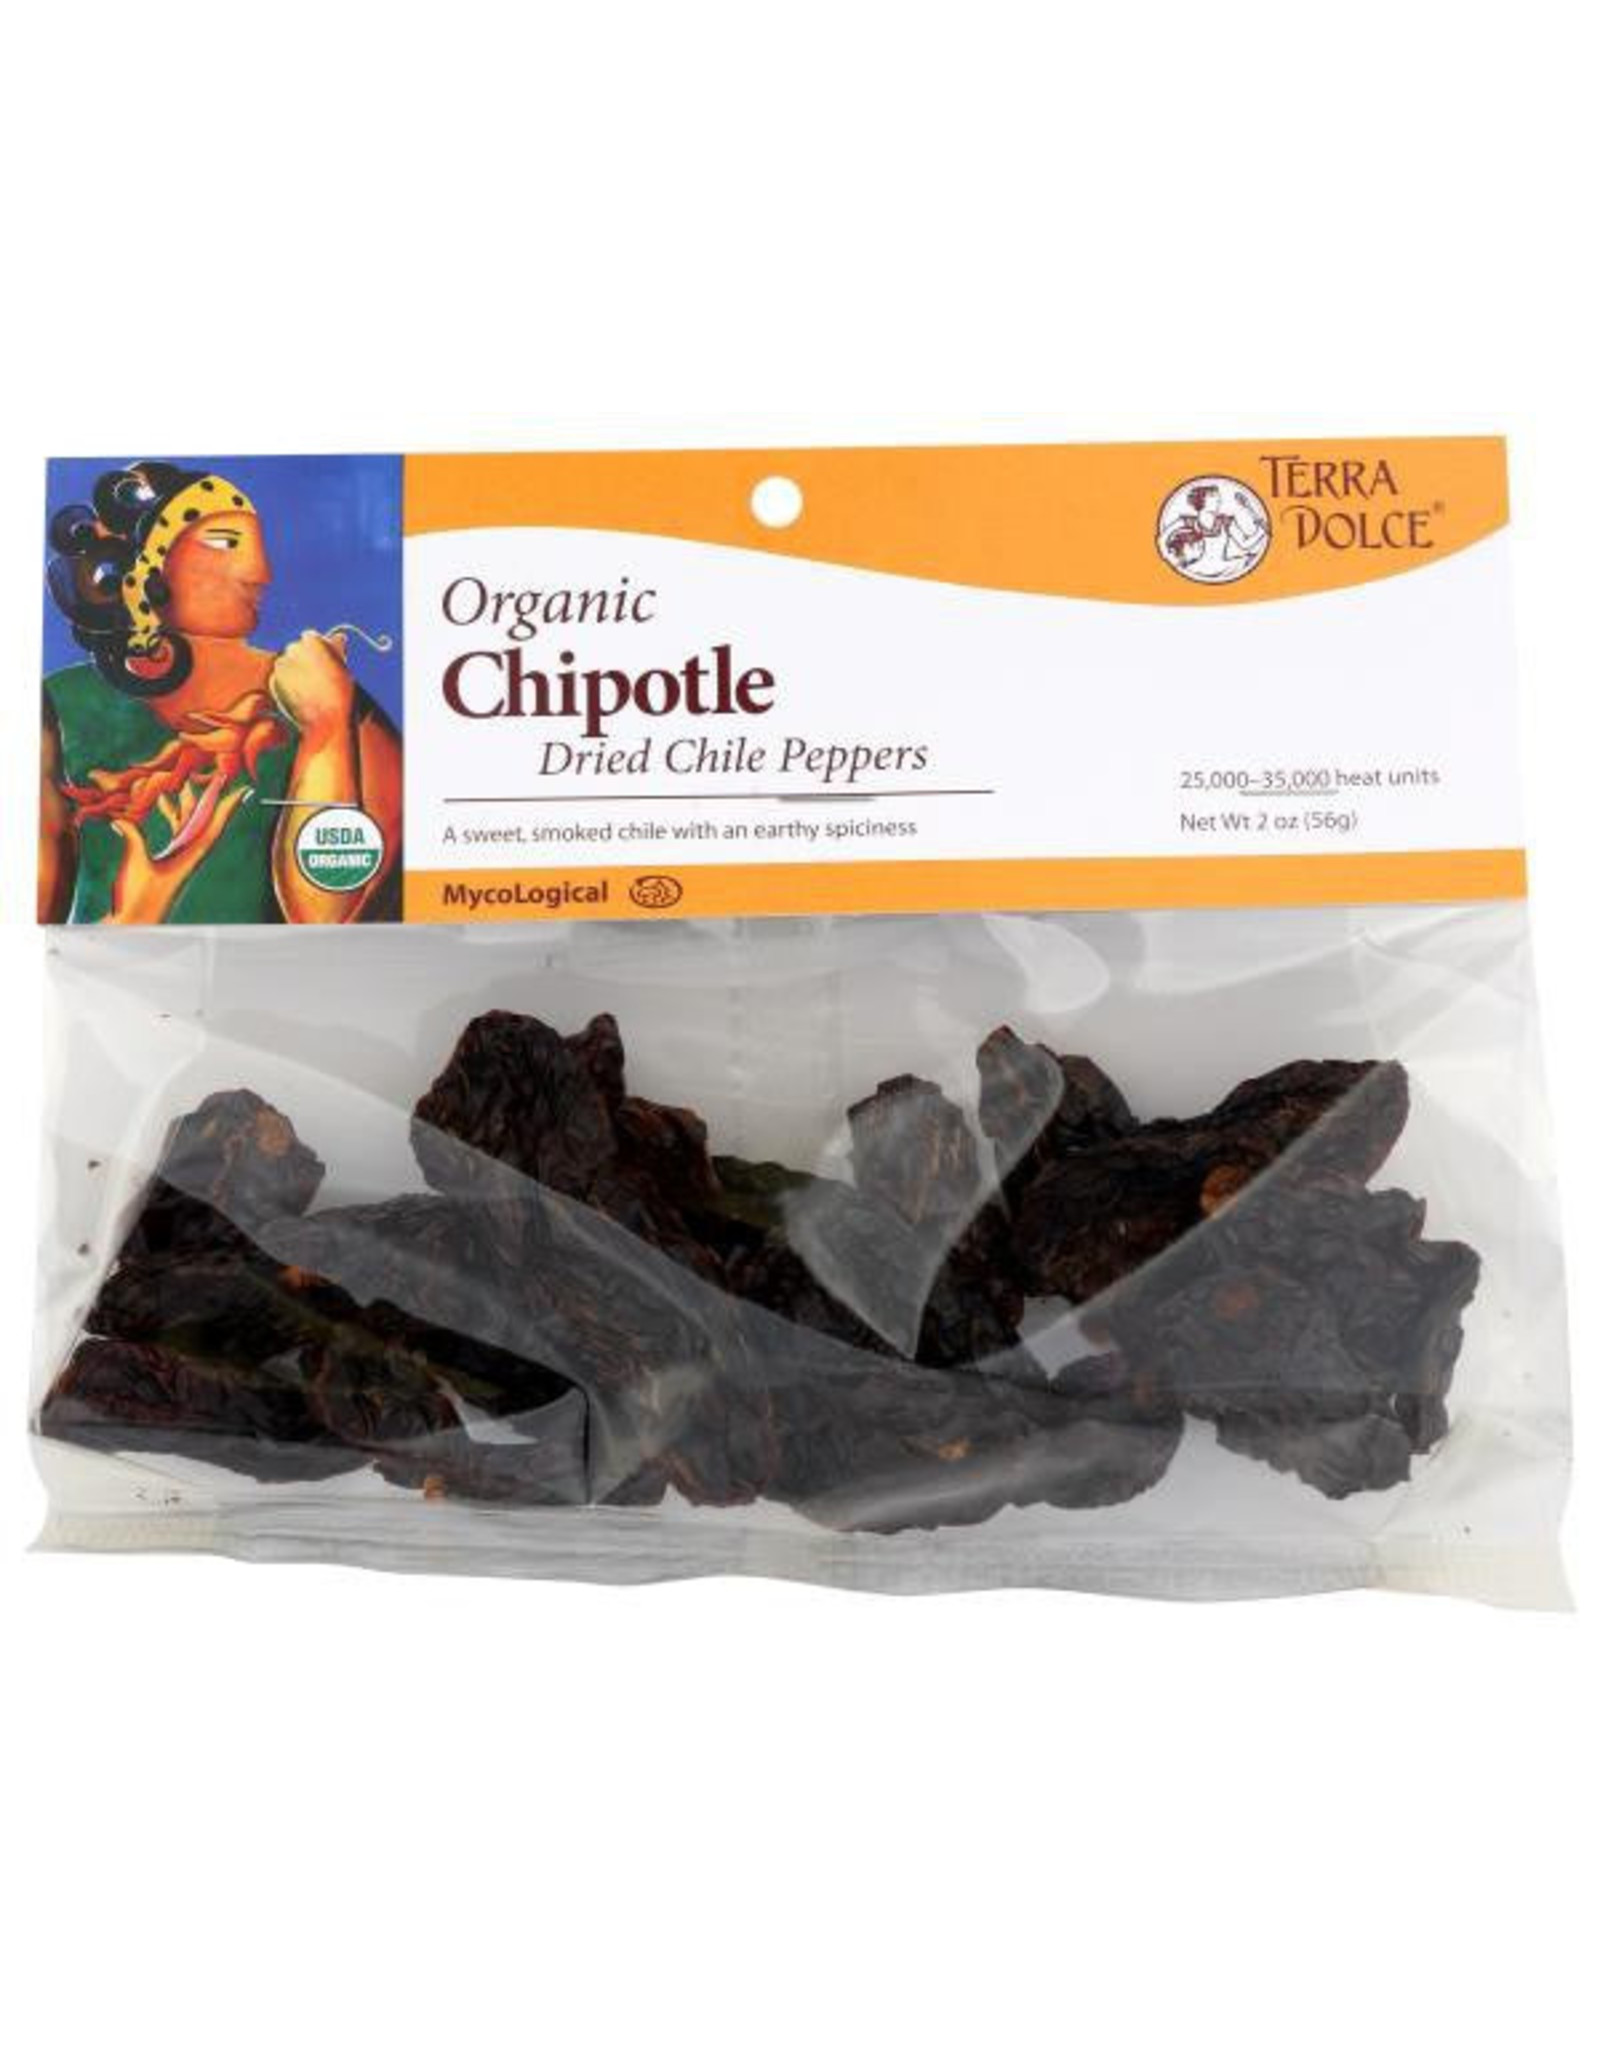 X Terra Dolce OG Dried Chipotle Chile Peppers